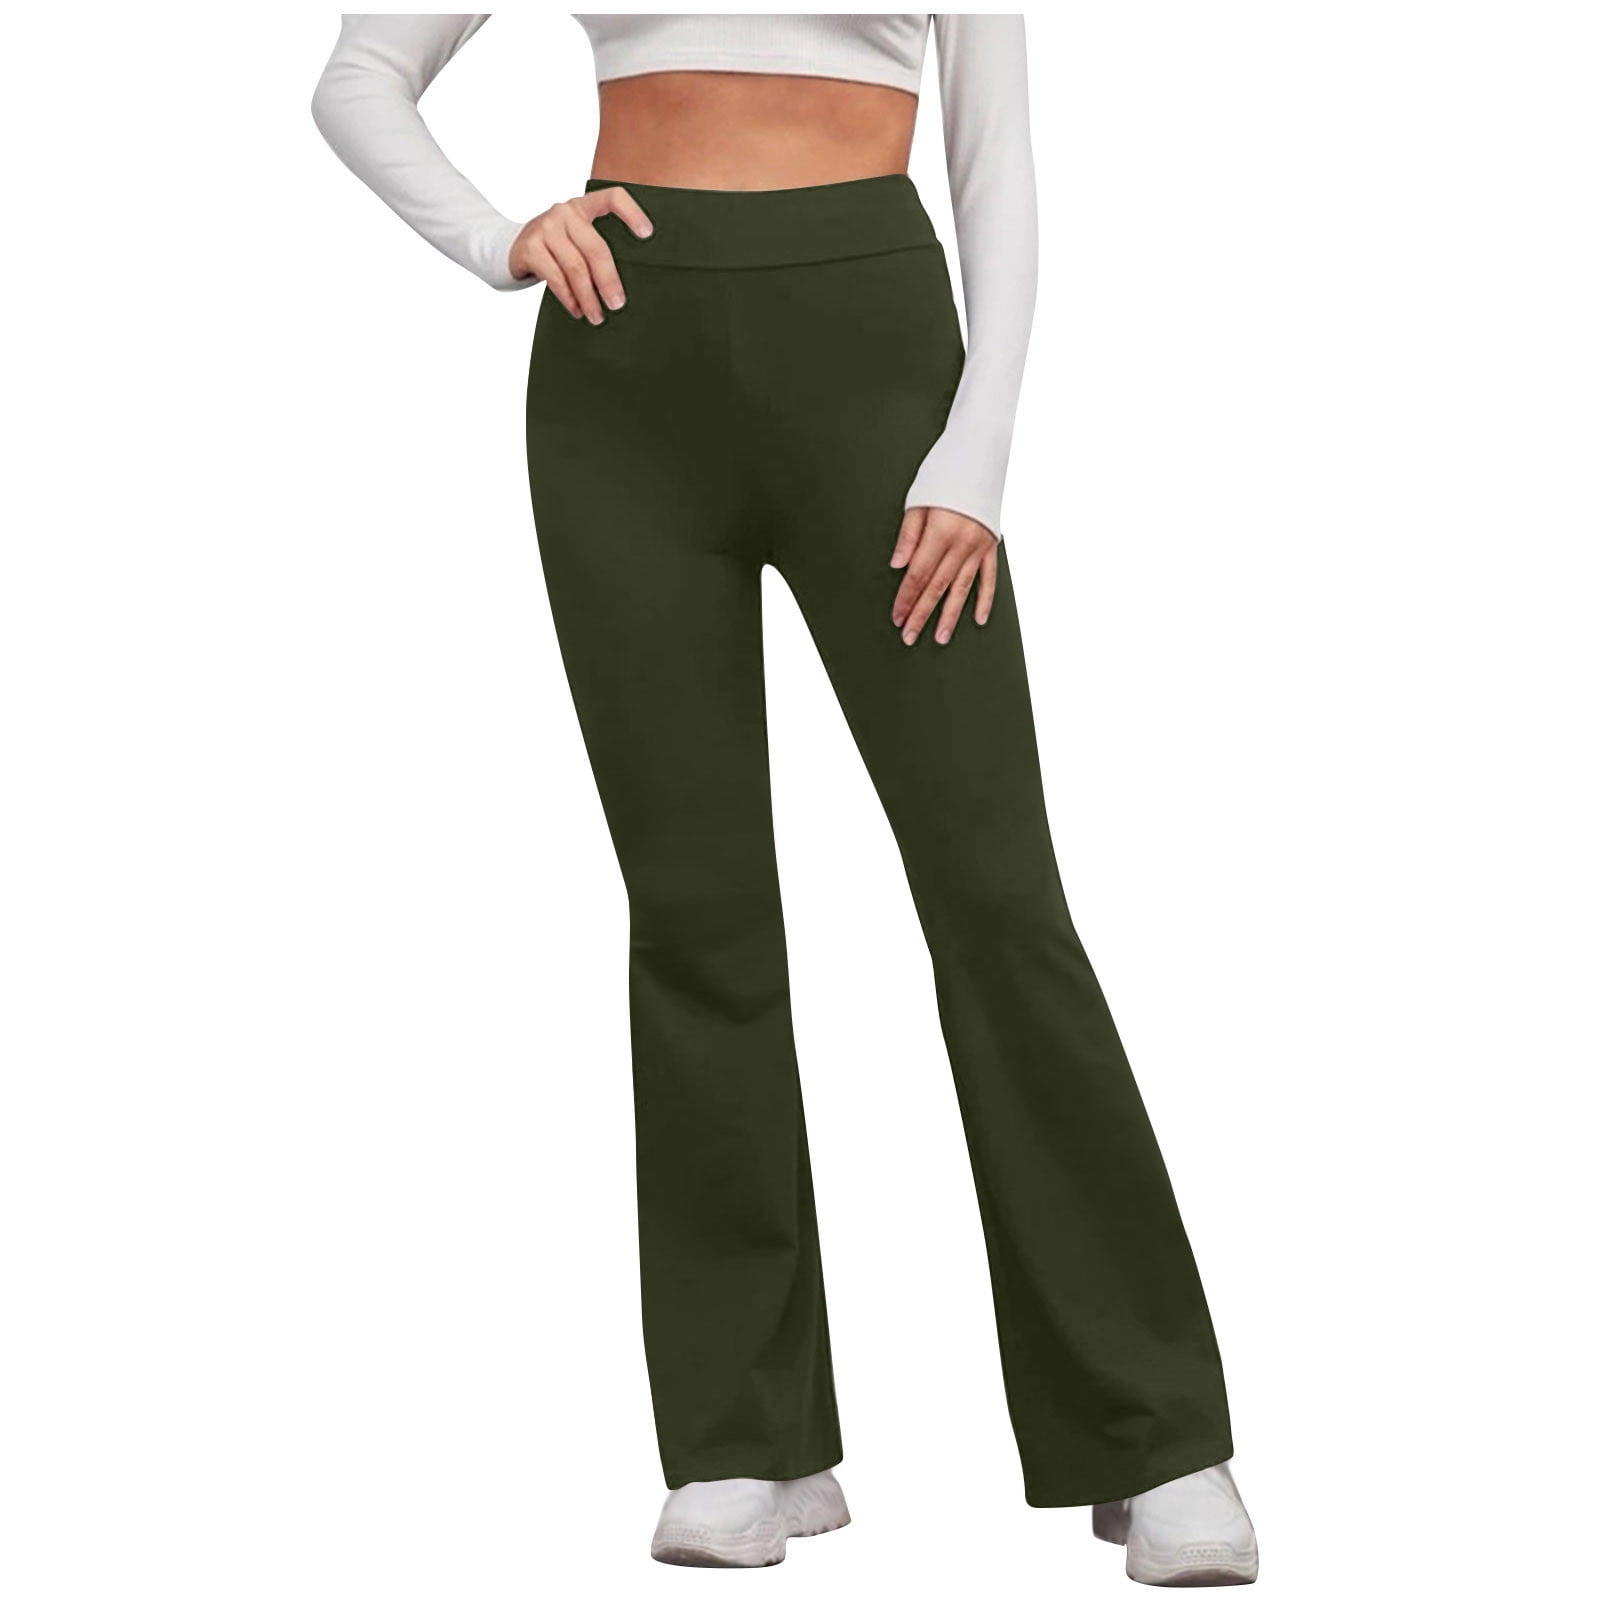 Ersazi Baggy Pants Women'S Fashion High Waist Straight Flare Pants Solid  Casual Loose Yoga Pants In Clearance Army Green Yogalicious Leggings M